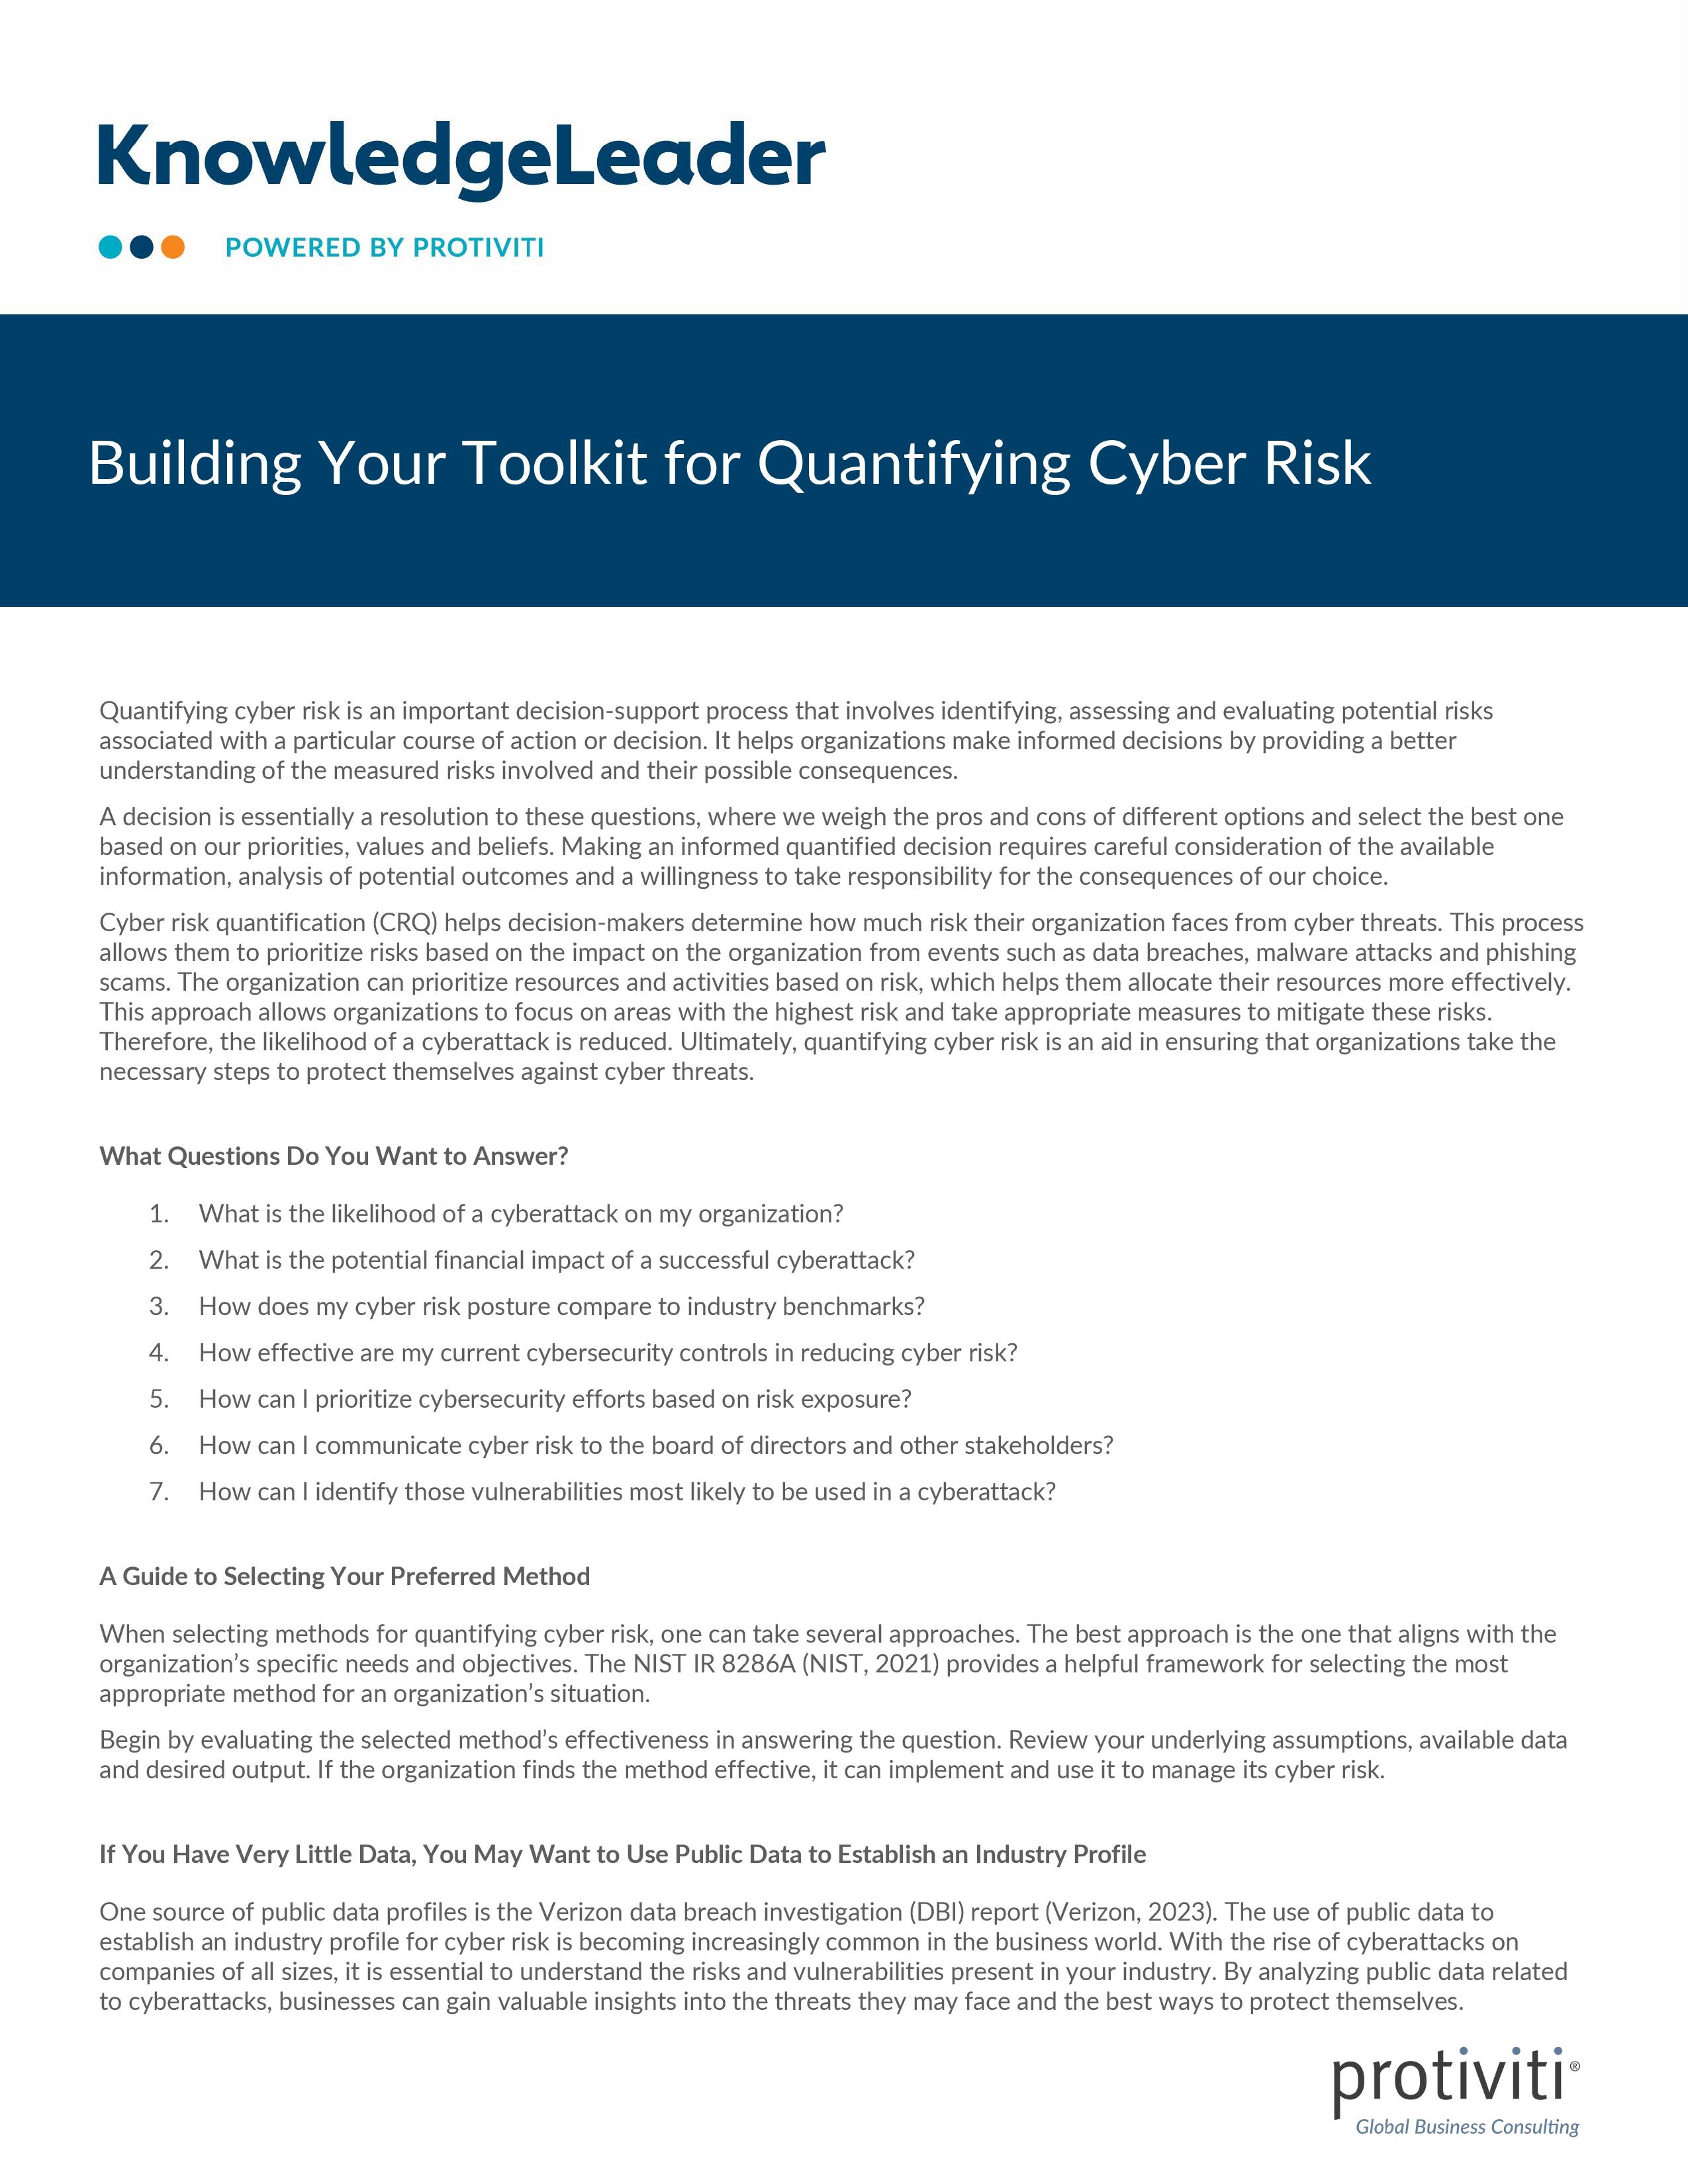 screenshot of the first page of Building Your Toolkit for Quantifying Cyber Risk